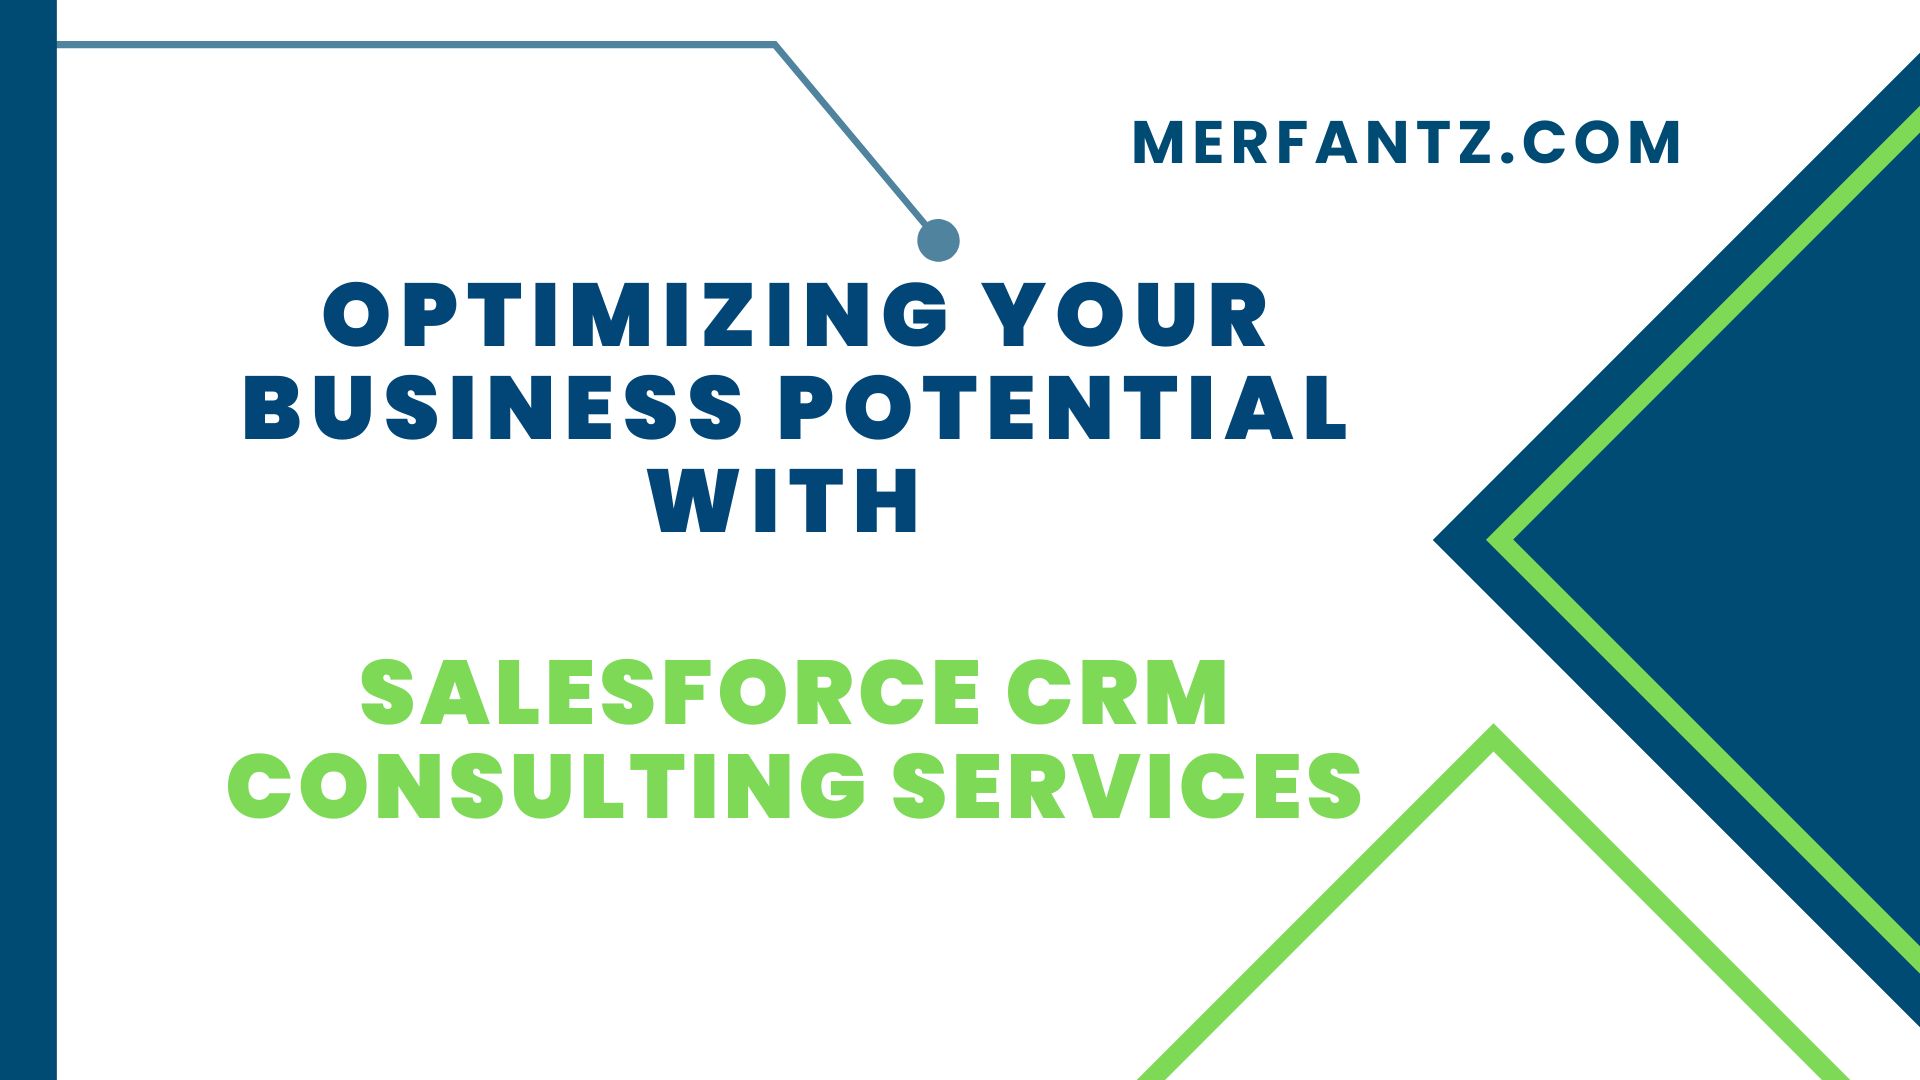 Salesforce CRM Consulting Services